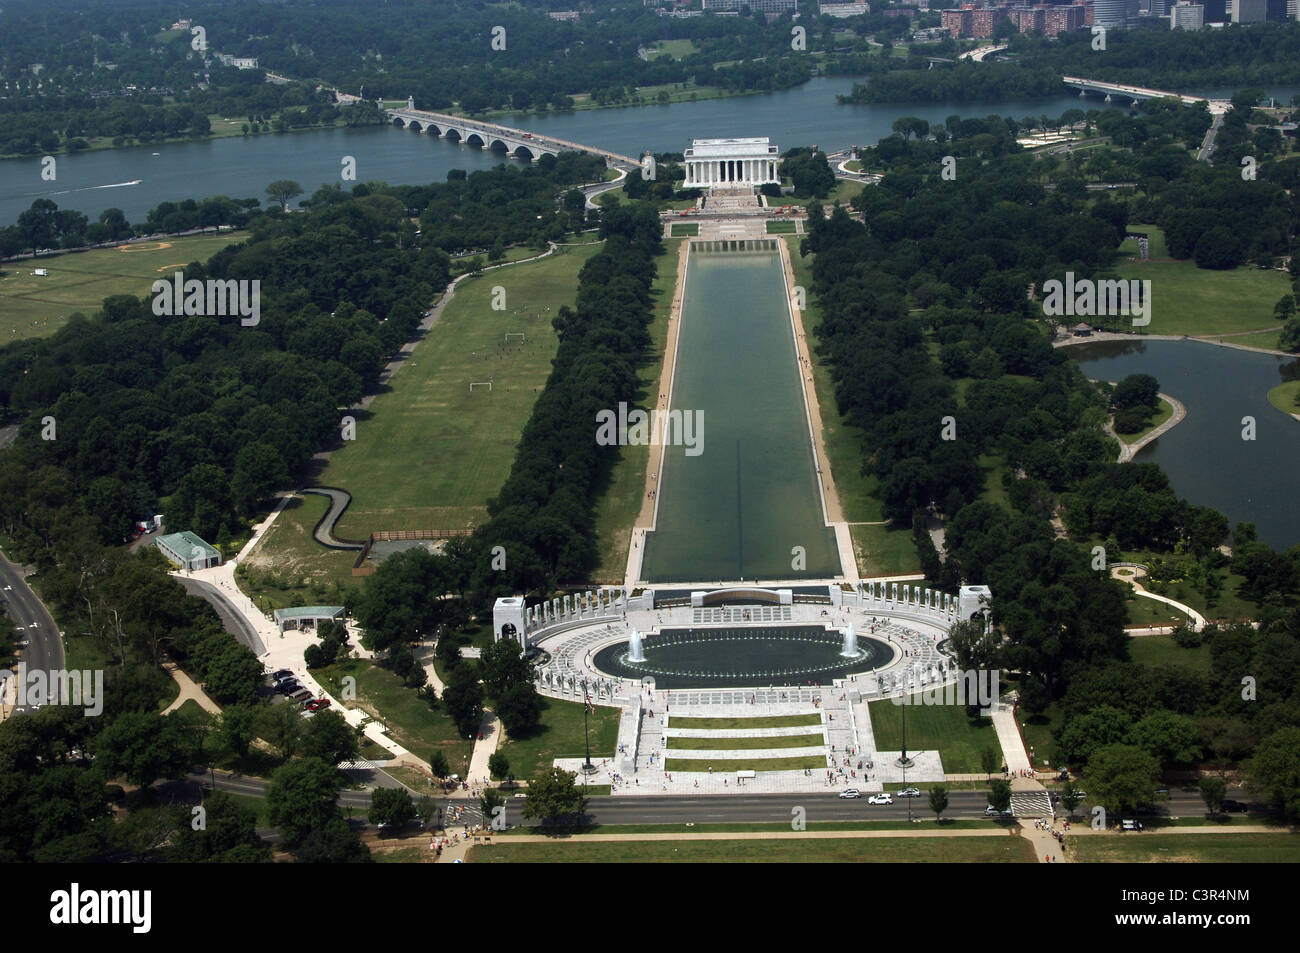 United States. Washington D.C. Overview of the National World War II Memorial, the Reflecting Pool and the Lincoln Memorial. Stock Photo